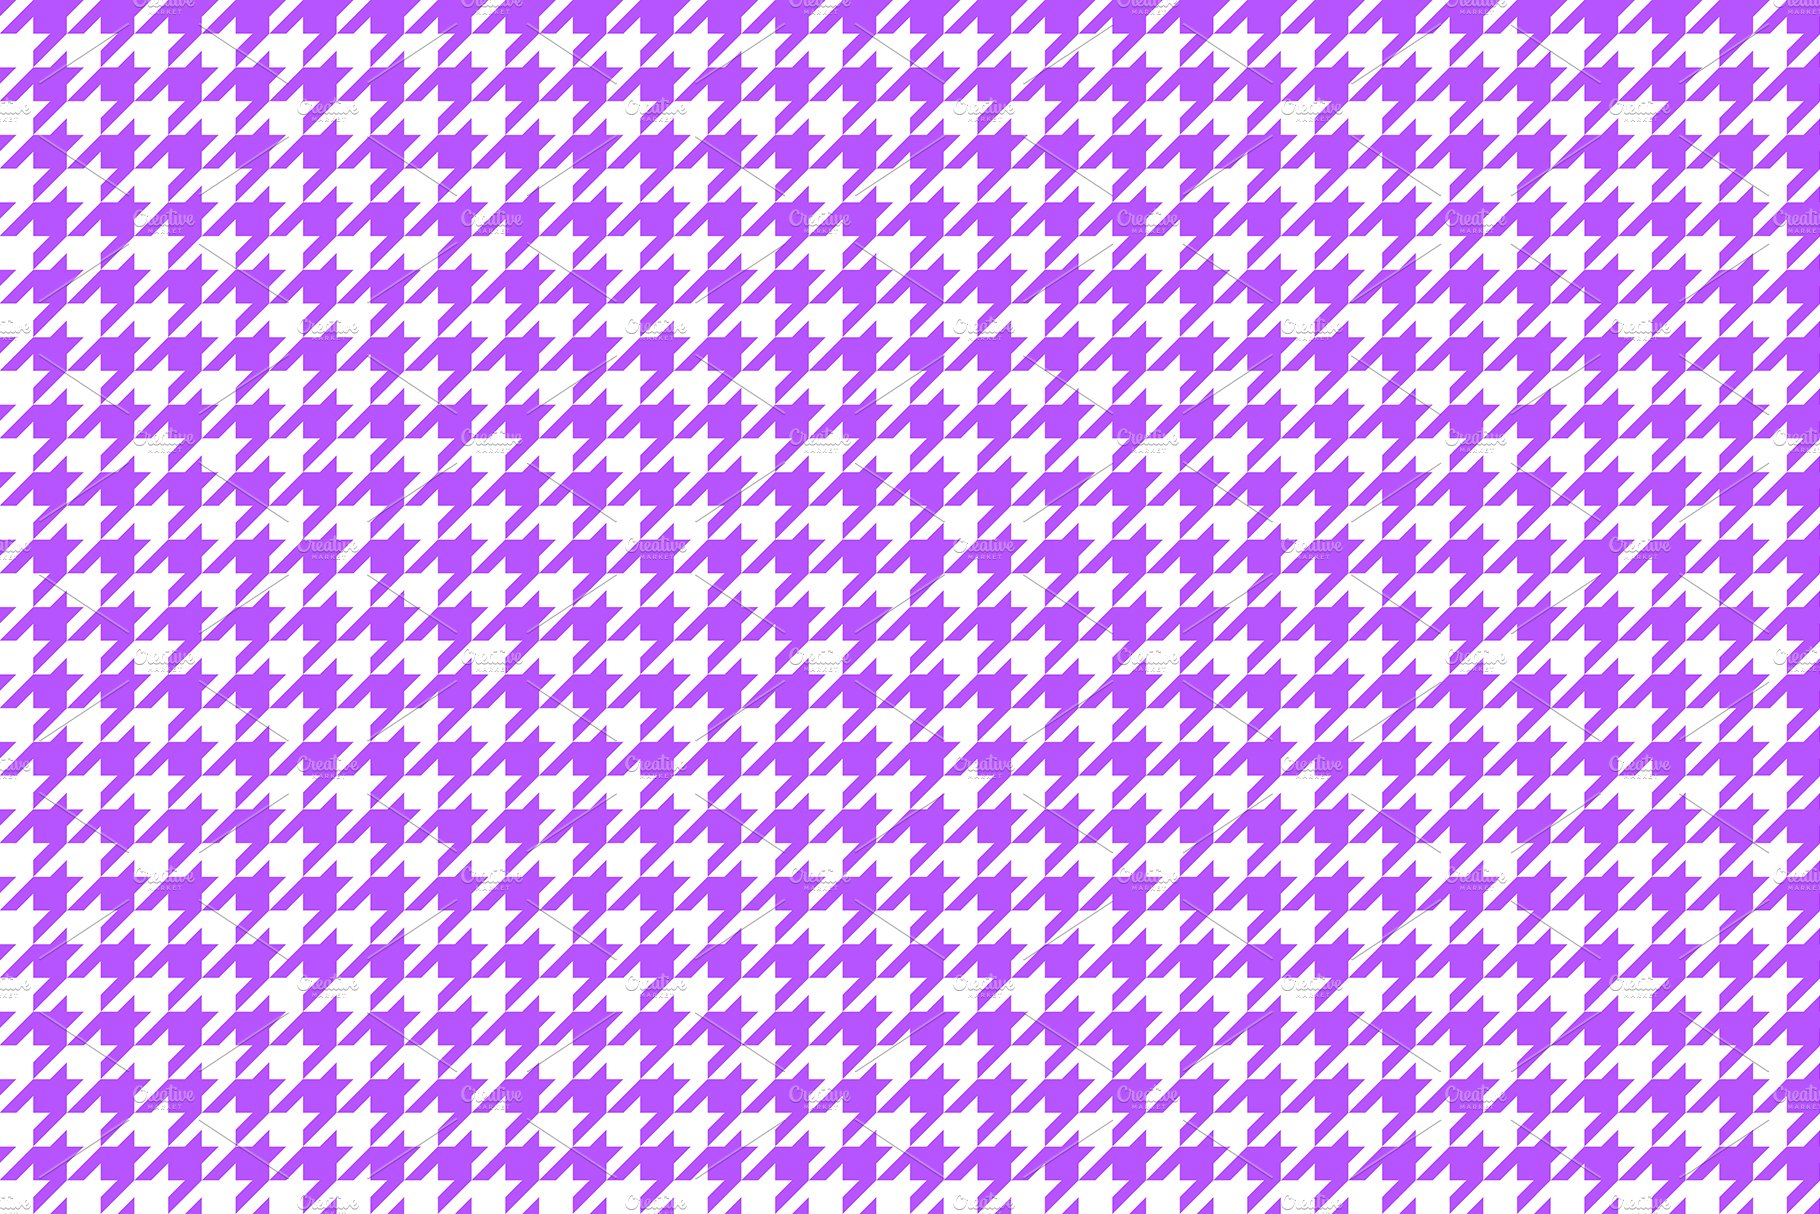 15 houndstooth pattern background texture copy 124